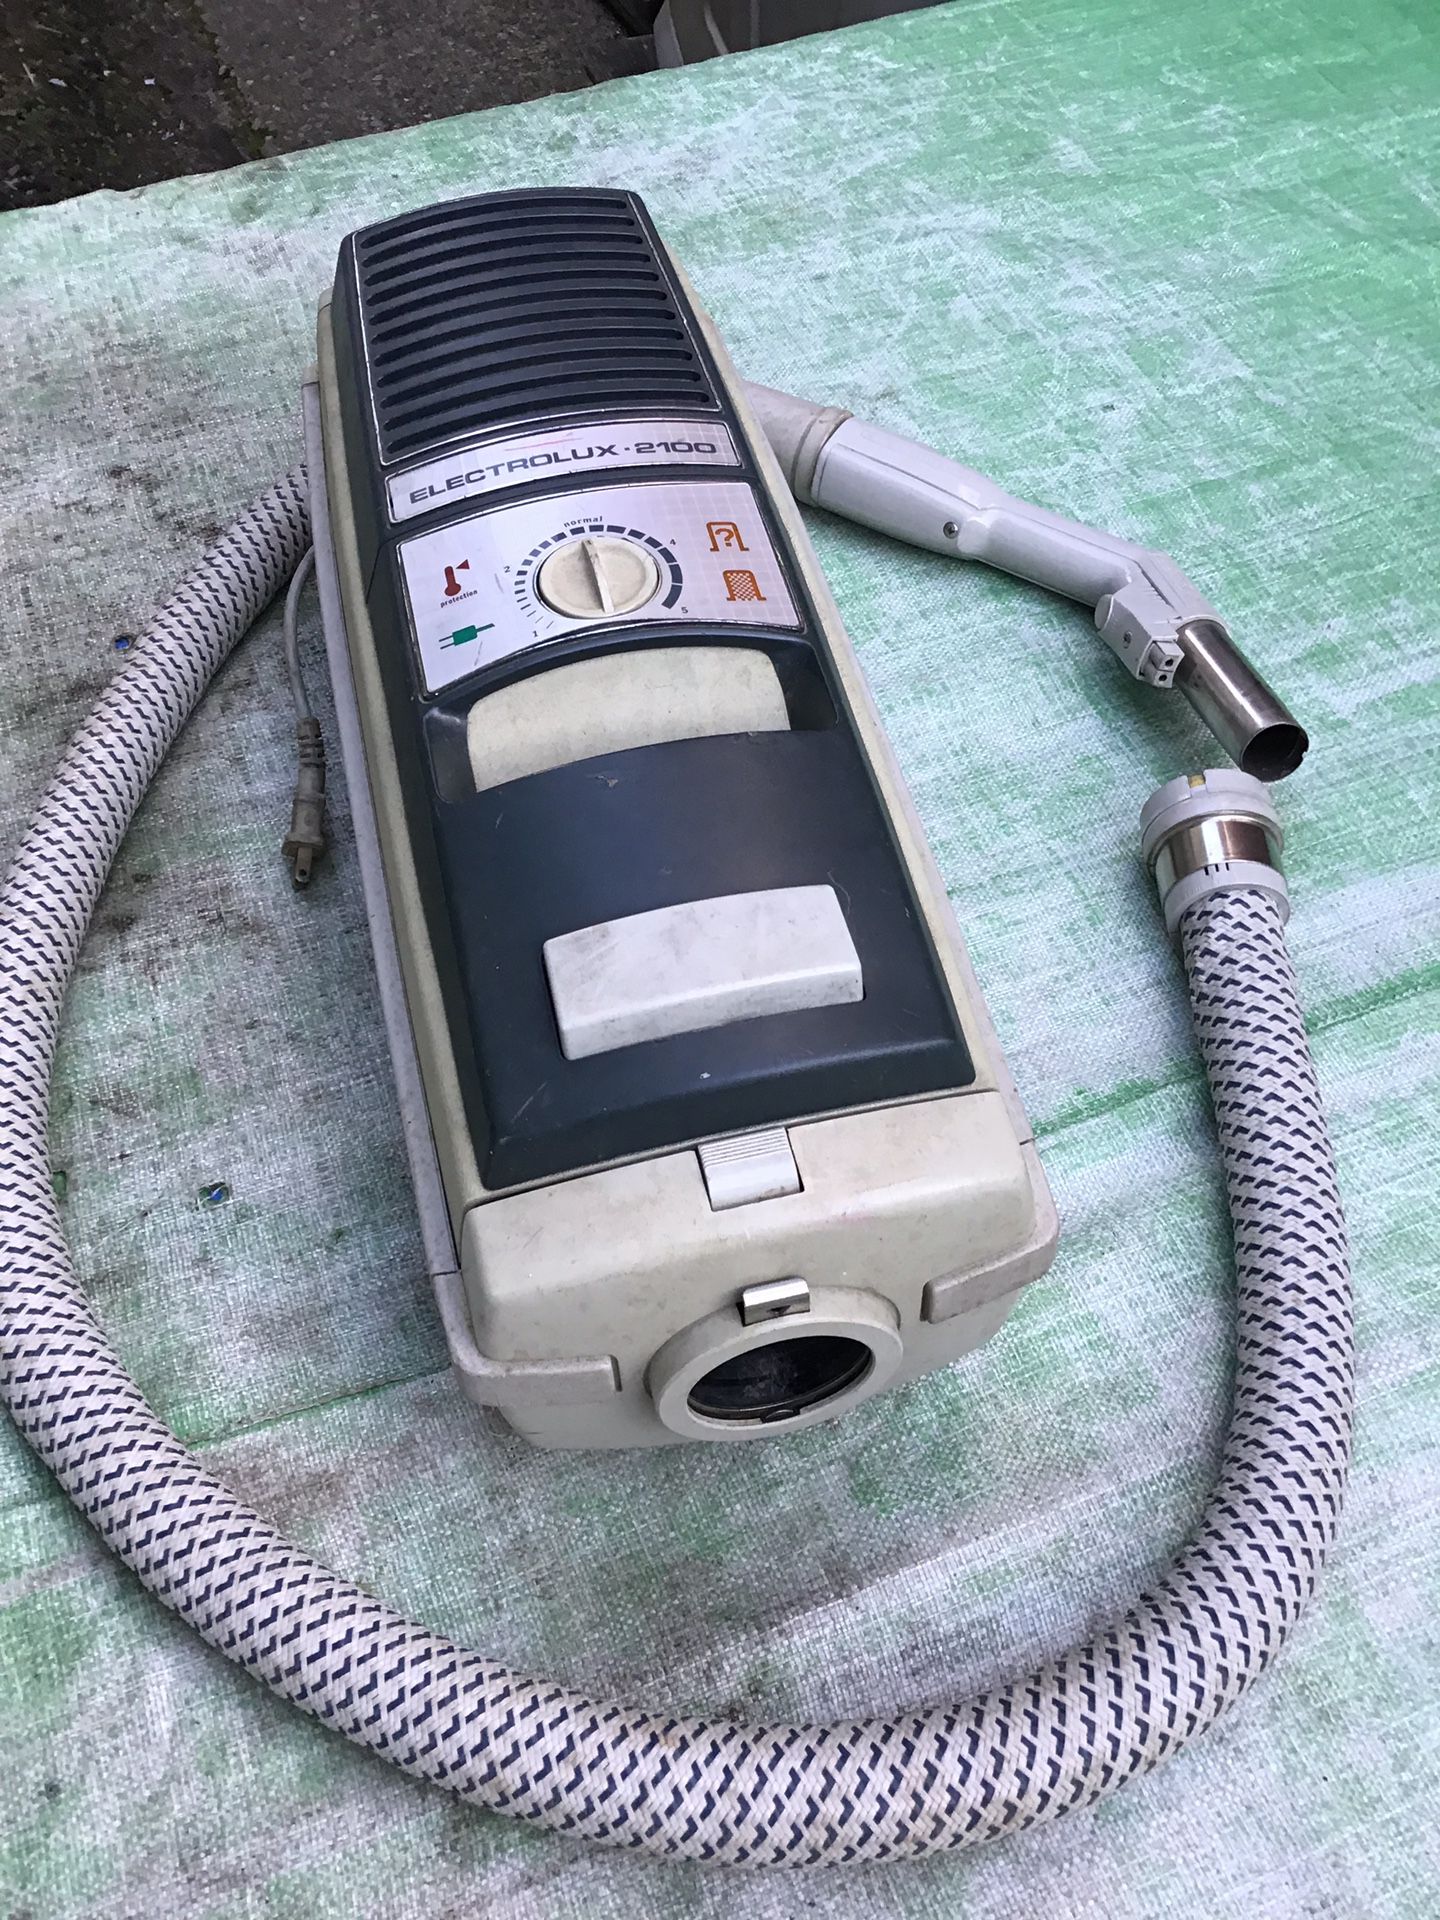 Vintage Electrolux vacuum 2100 Canister works needs hose no Attachments